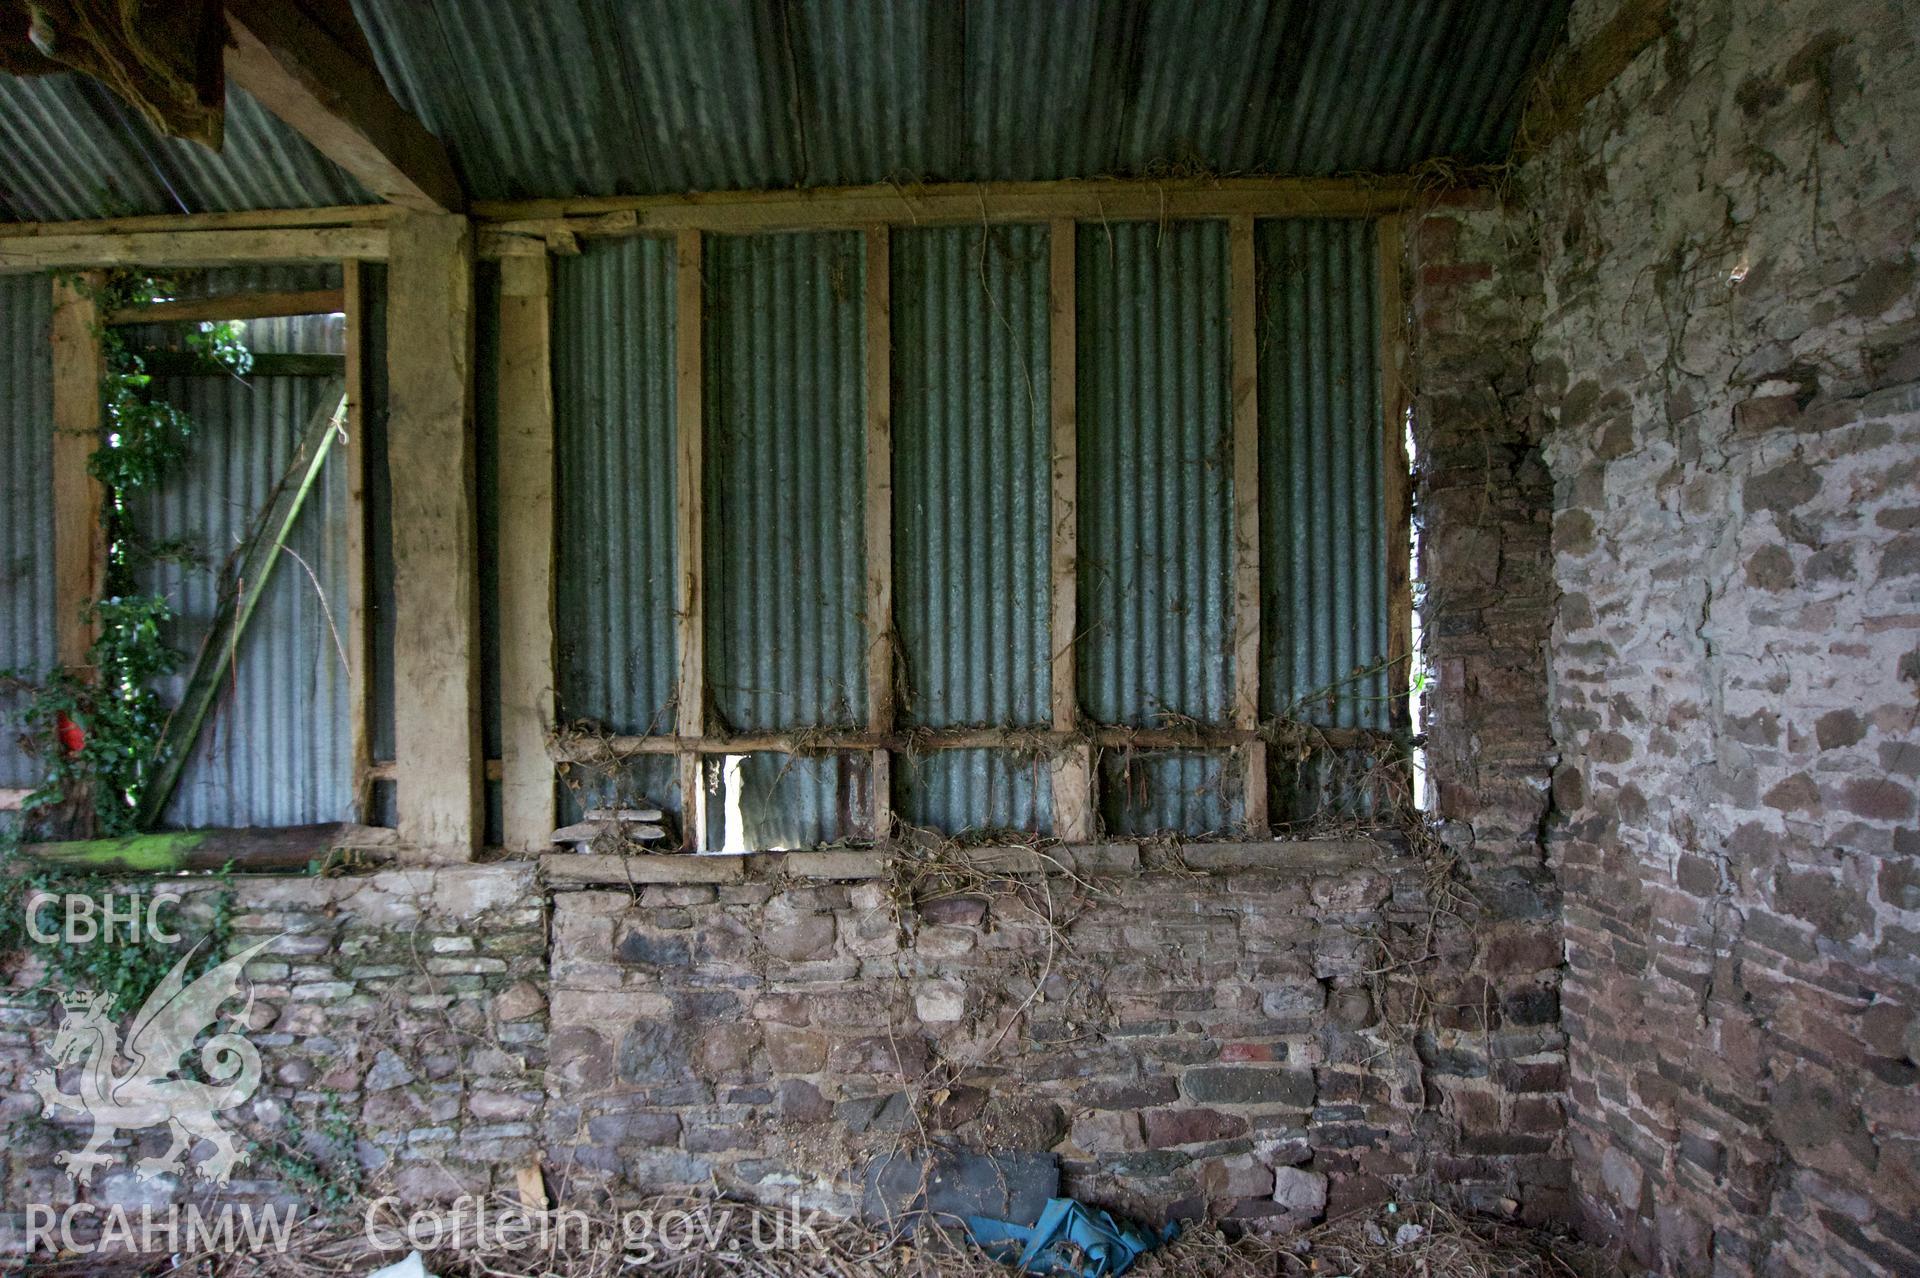 Internal view of the west end of the south wall at Middle Ton Threshing Barn. Photographed for the Historic Building Photographic Record of Middle Ton Threshing Barn, Llanvapley, by Dan Courtney of Cog Architects, 2019.